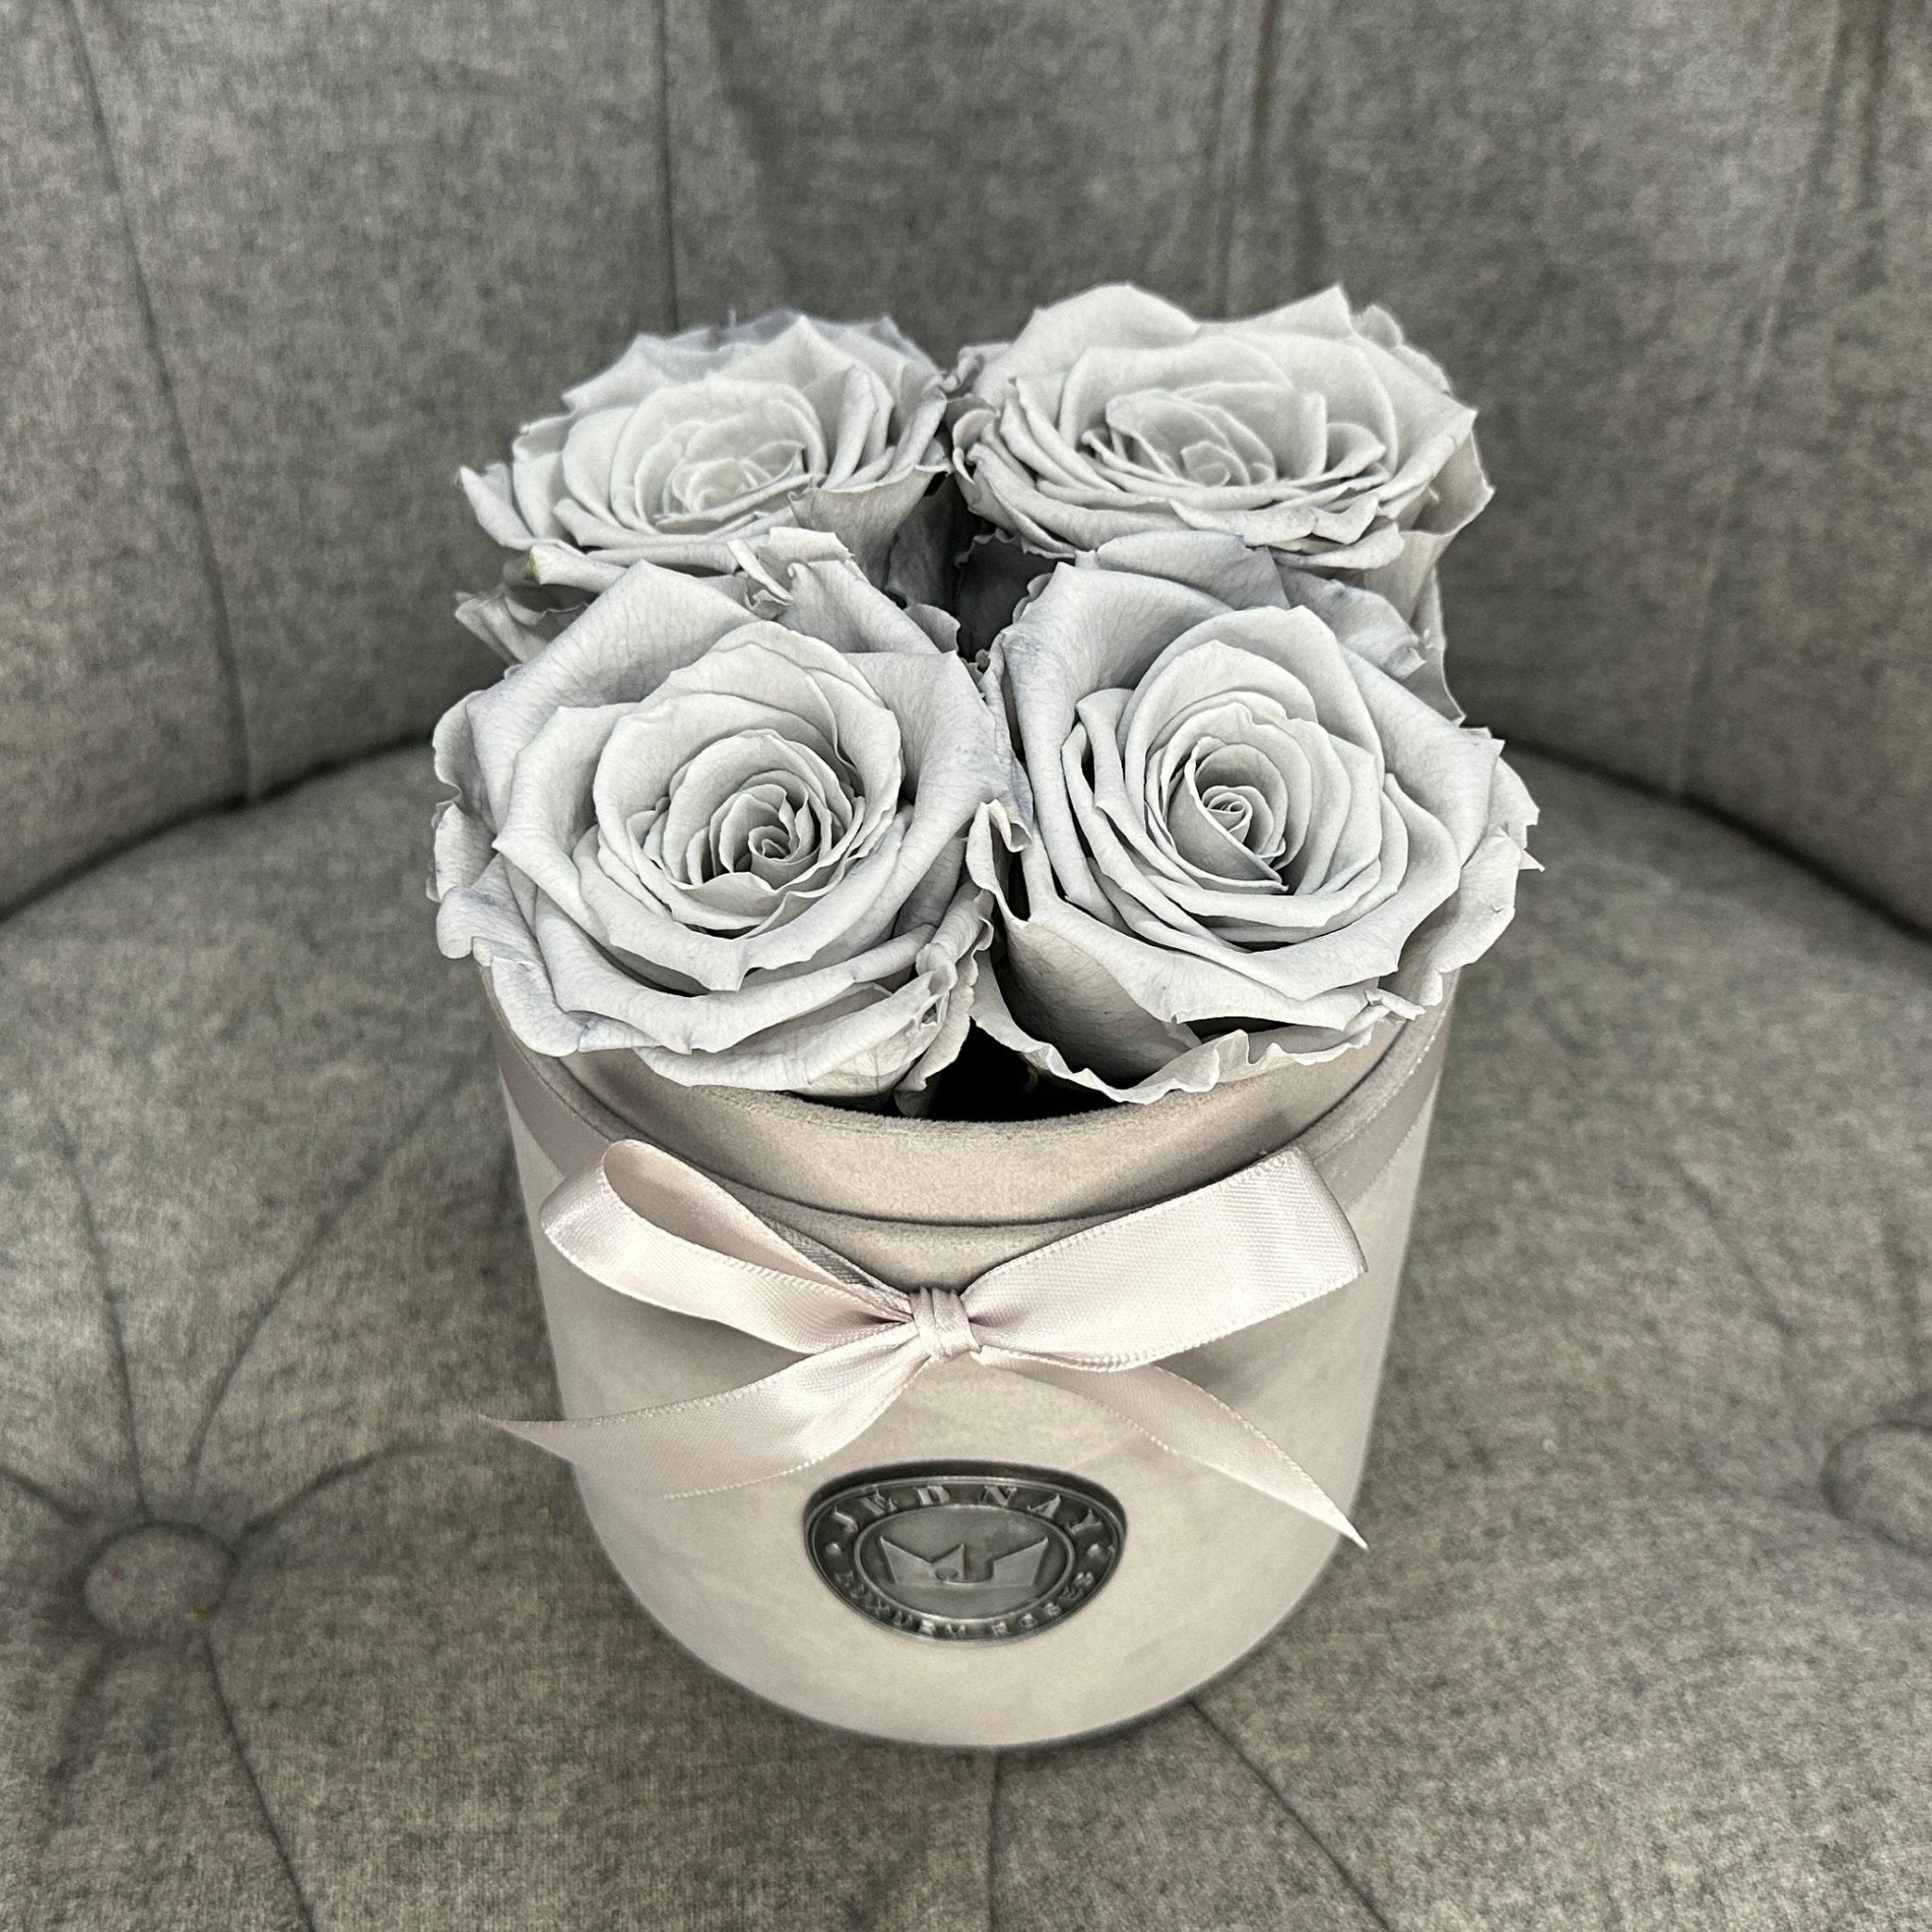 Petite Grey Suede Forever Rose Box - Graceful Grey Eternal Roses - Jednay Roses